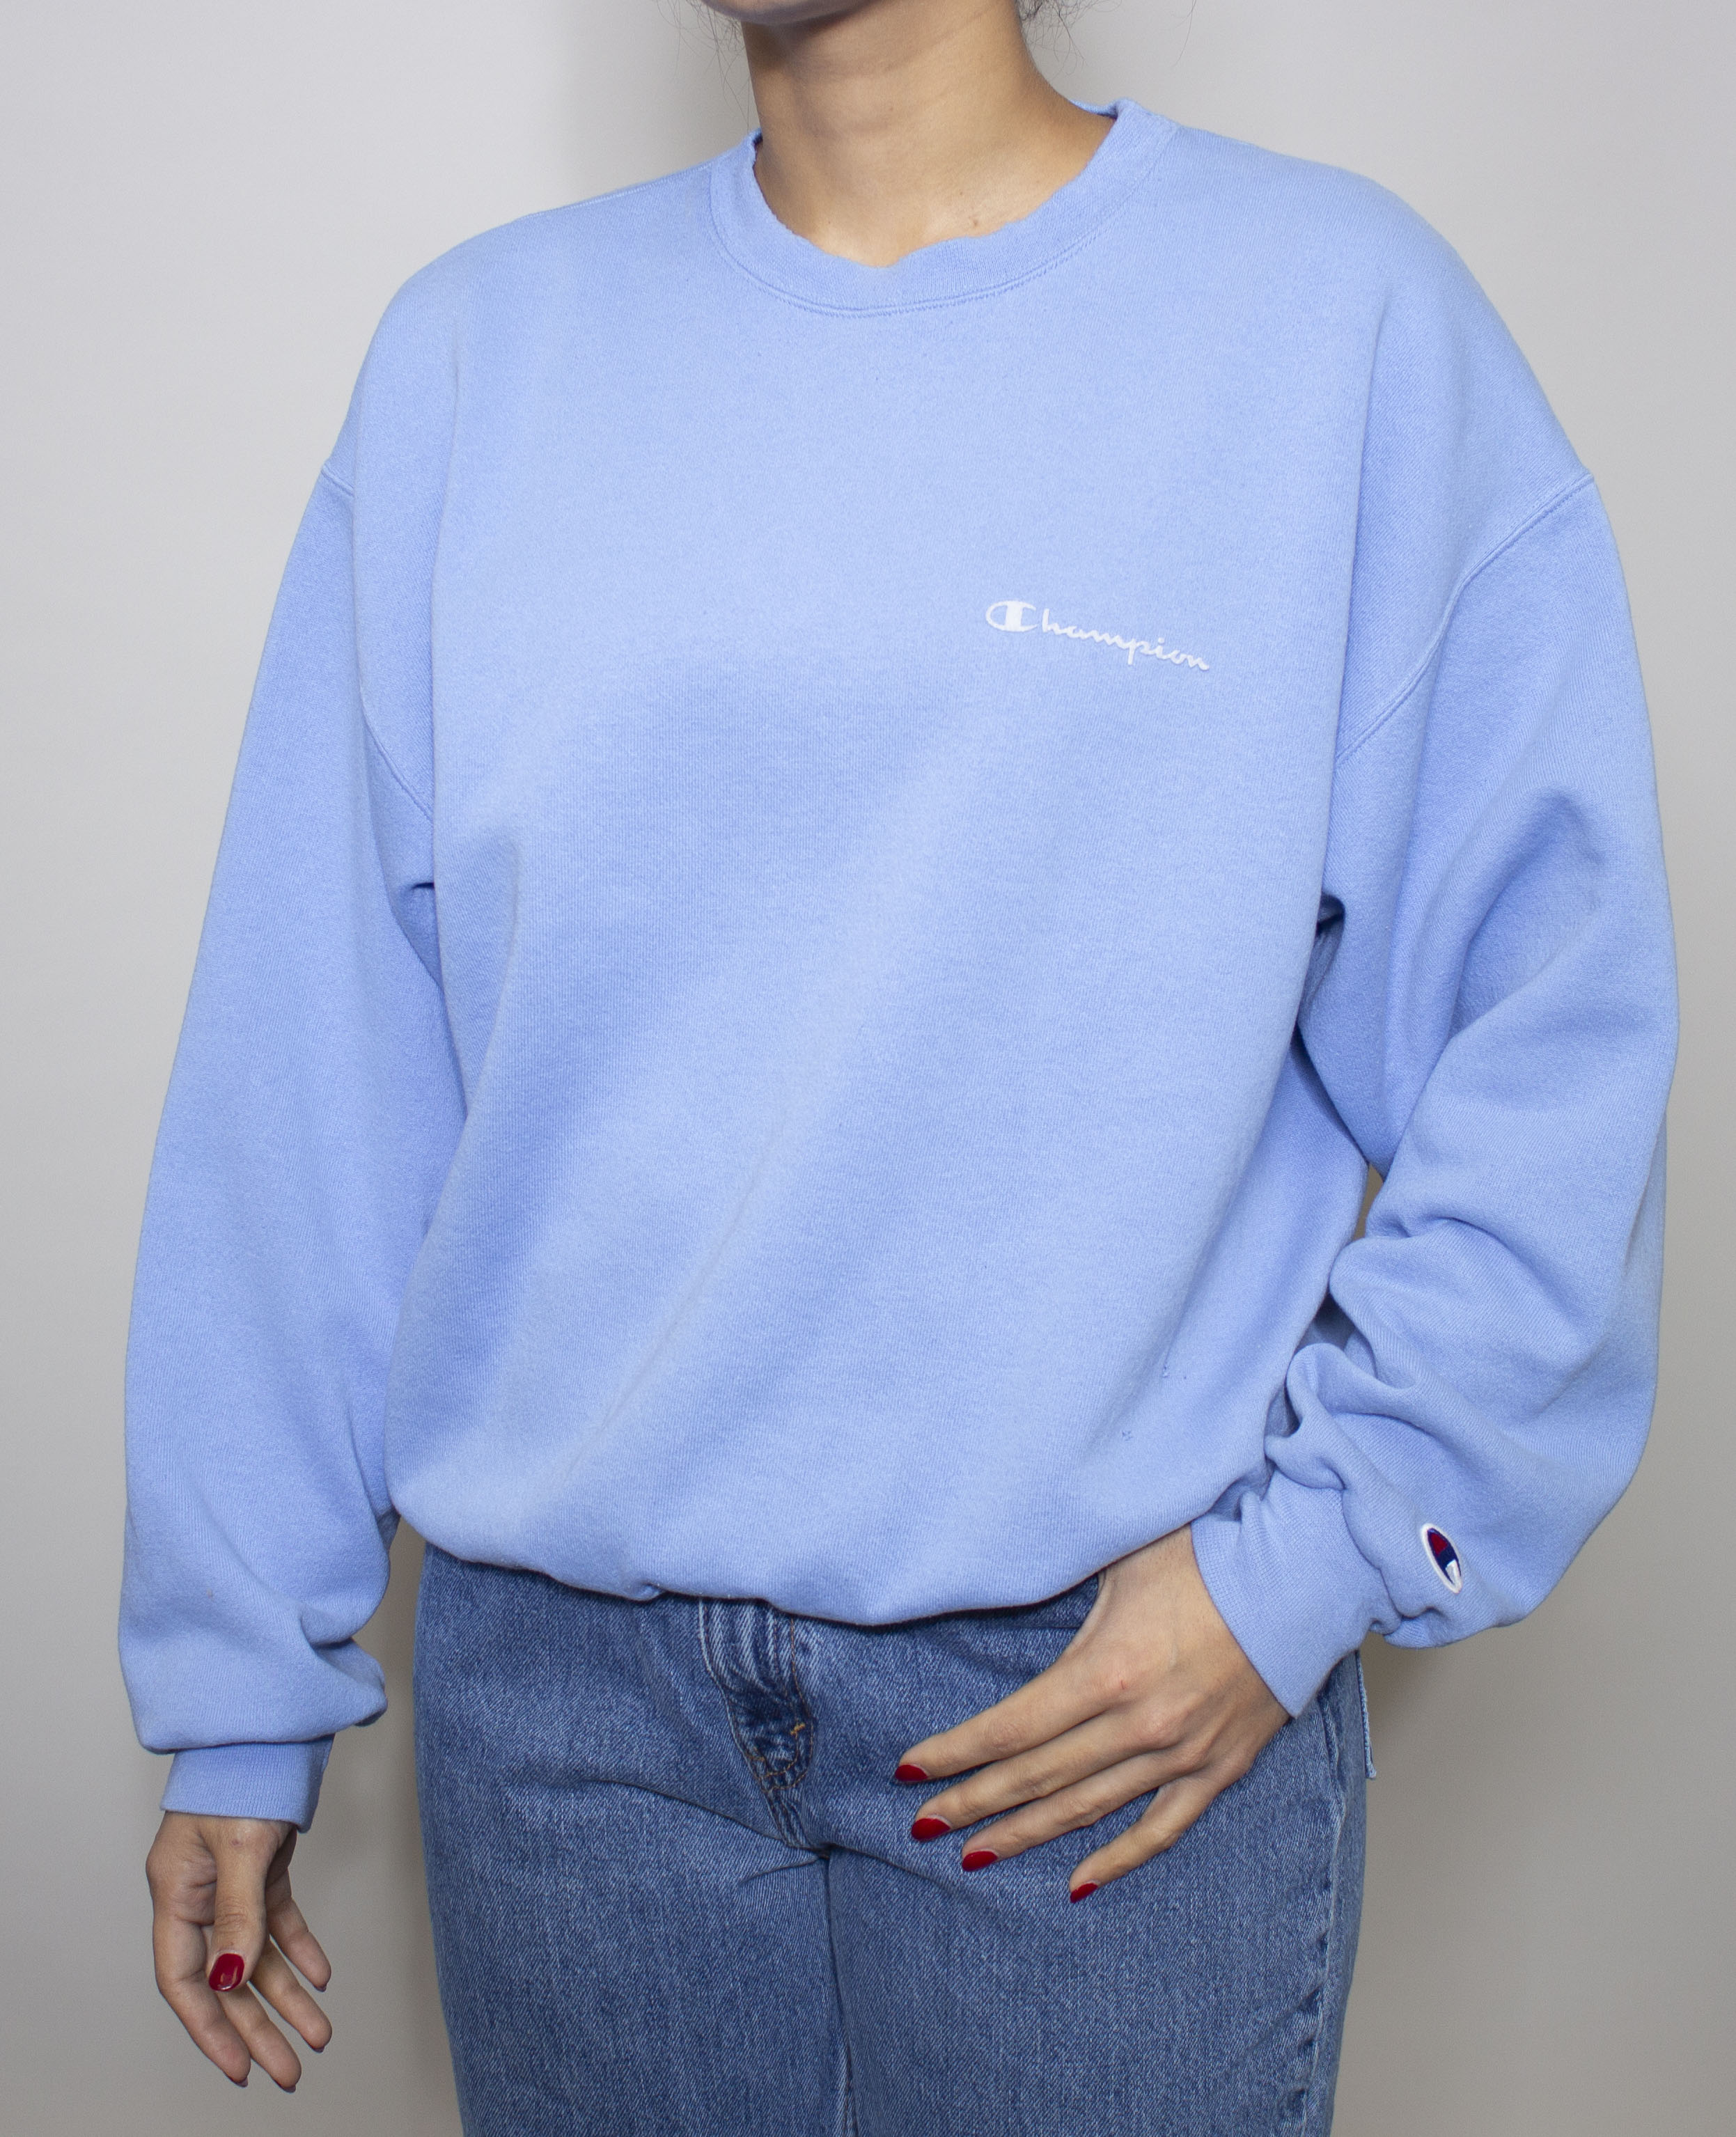 Buy OFF ANY baby blue sweatshirt CASE AND 70% OFF!